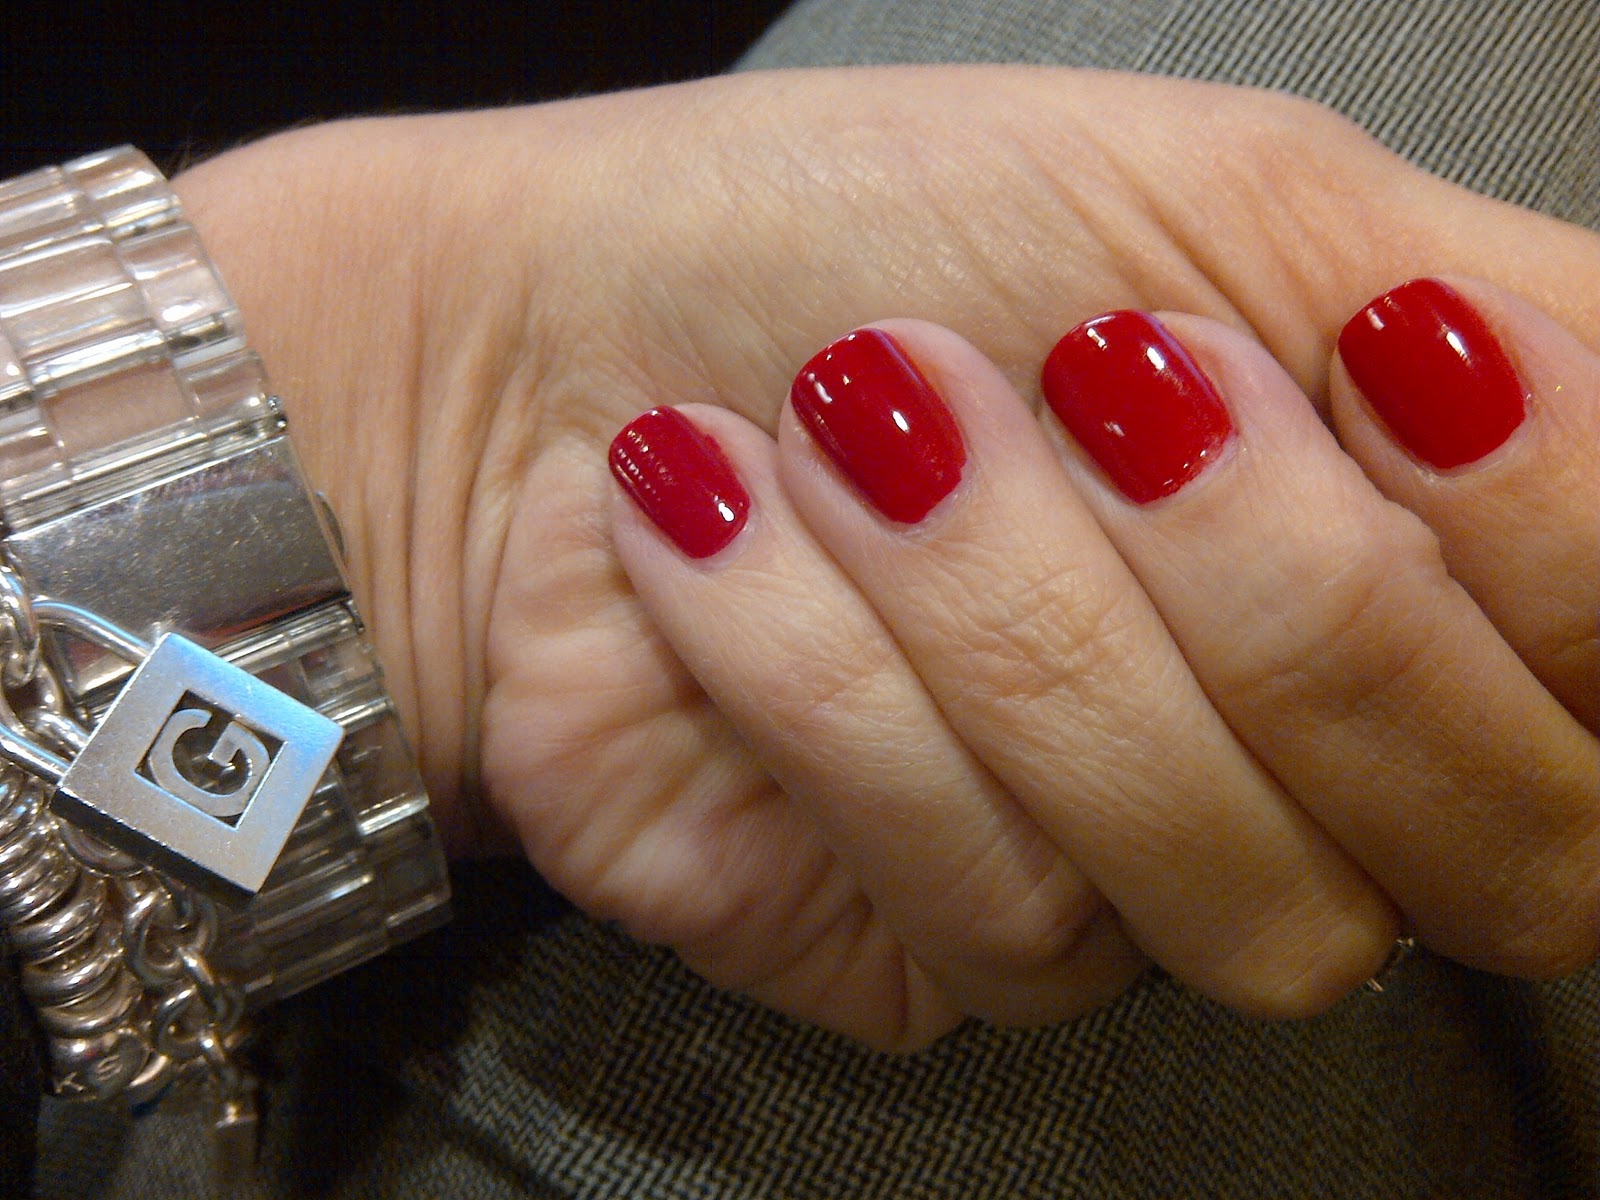 6. OPI Nail Lacquer in "Big Apple Red" - wide 4